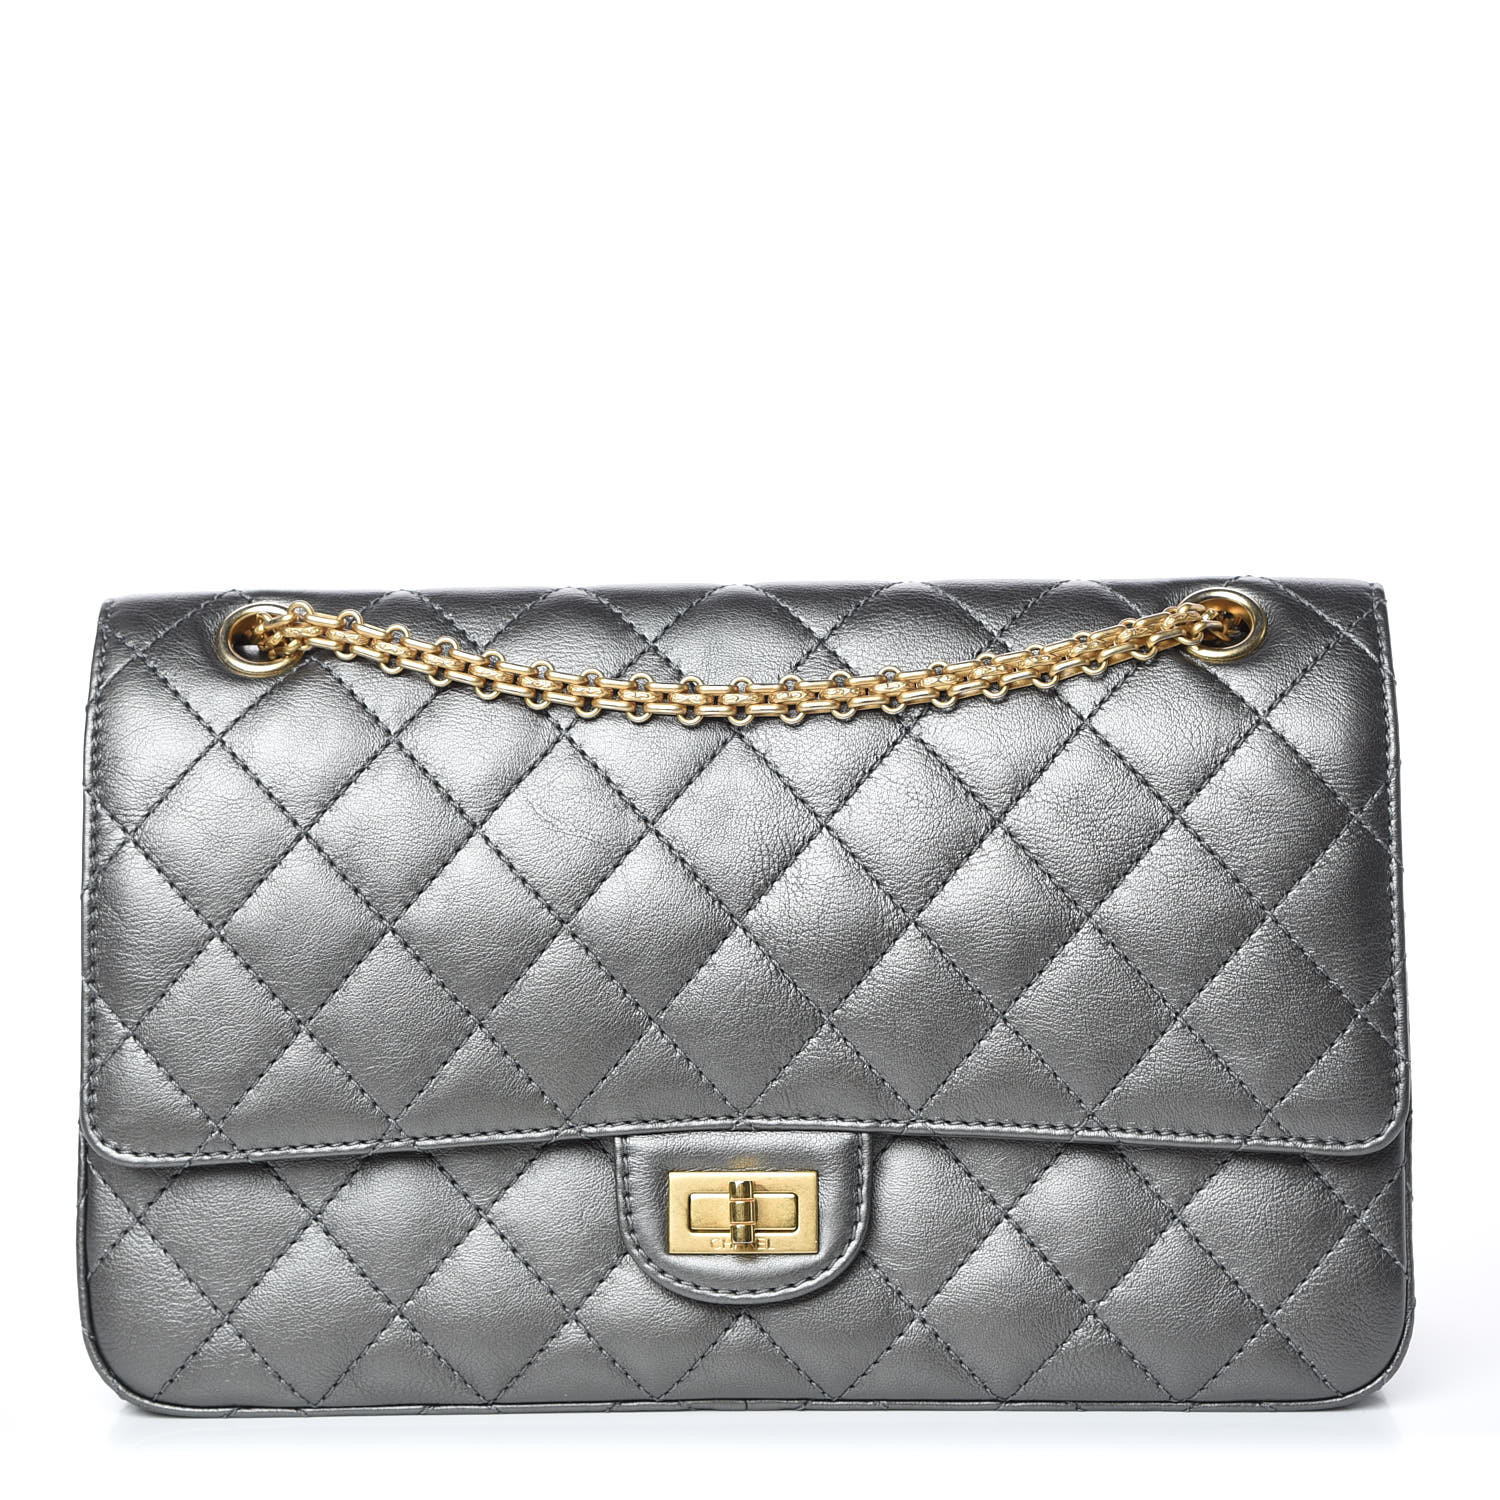 CHANEL Metallic Calfskin Quilted 2.55 Reissue 226 Flap Charcoal 383004